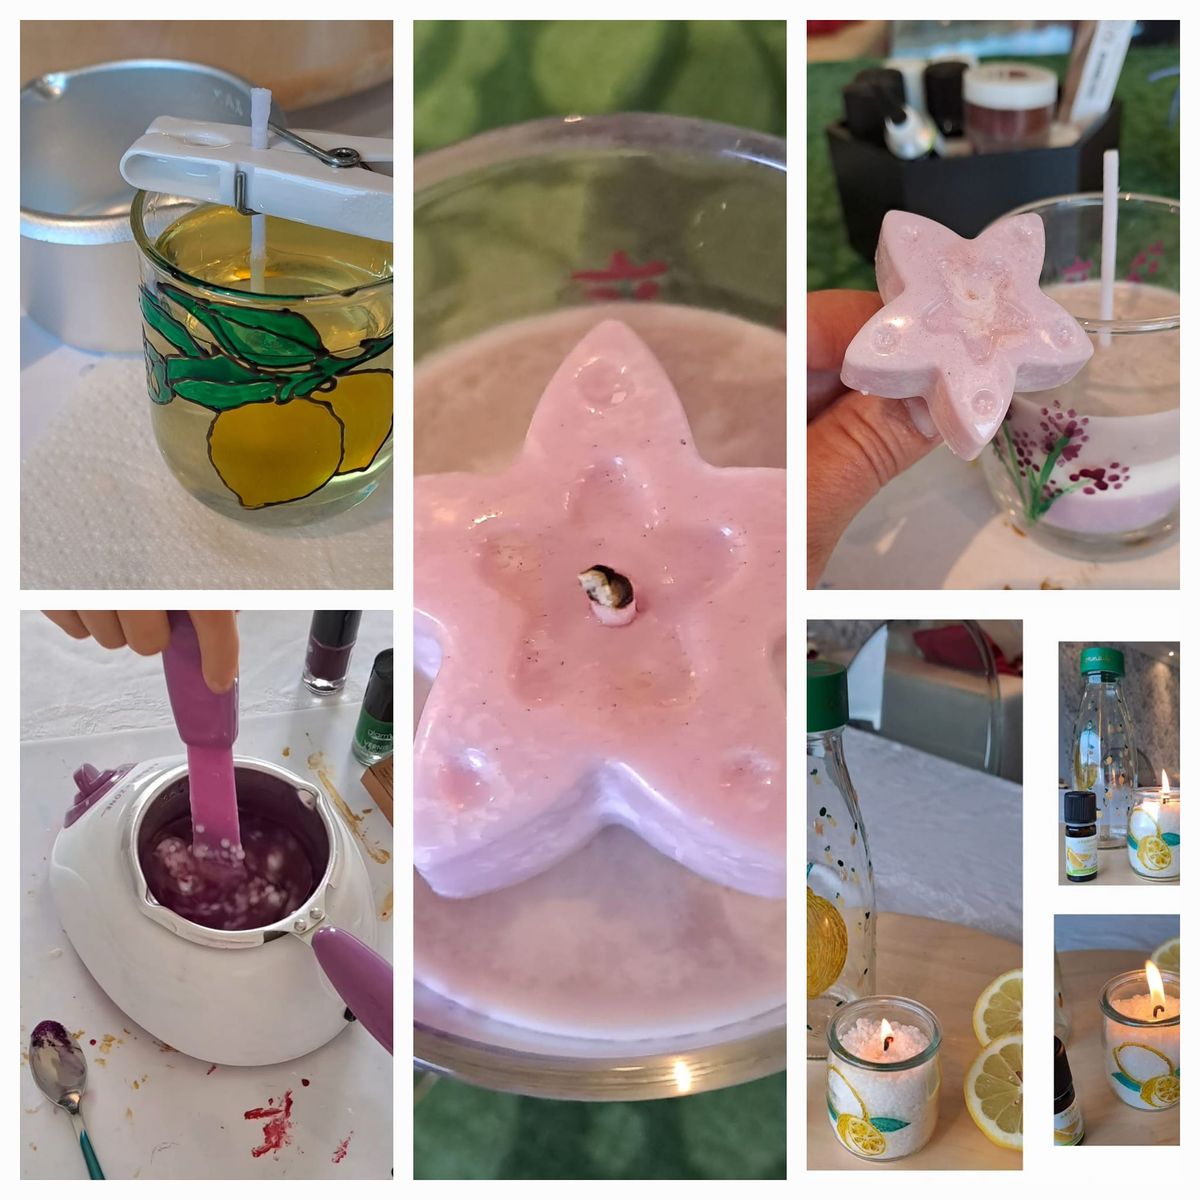 Candle making workshop : choose your scent and practise French \ud83c\uddeb\ud83c\uddf7